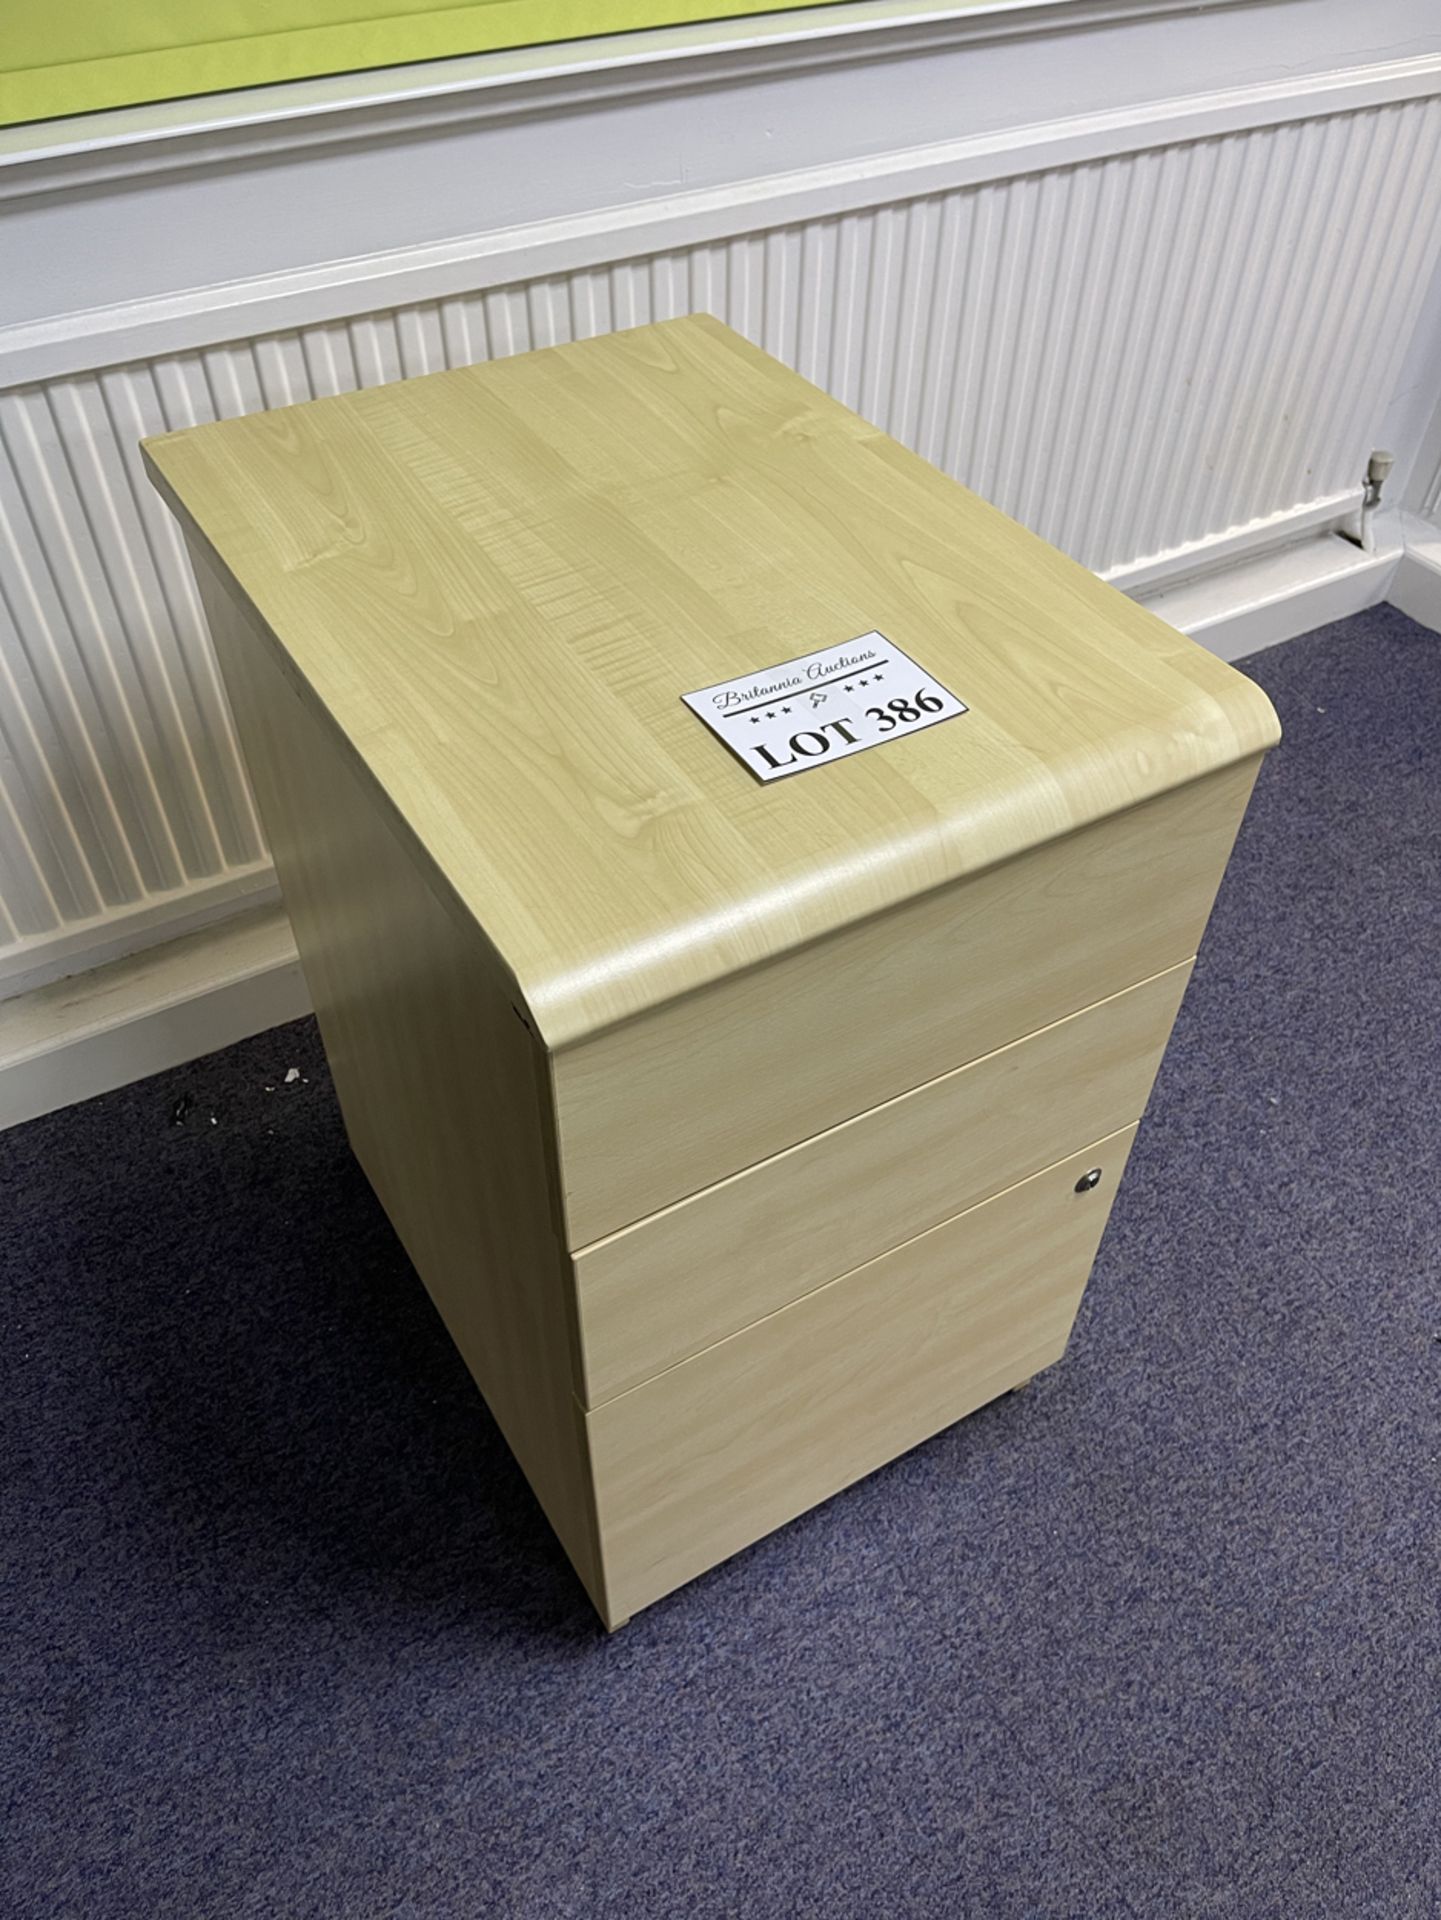 Set of Office Drawers. Dimensions 430mm x 600mm x 730mm High Approx. - Image 2 of 2